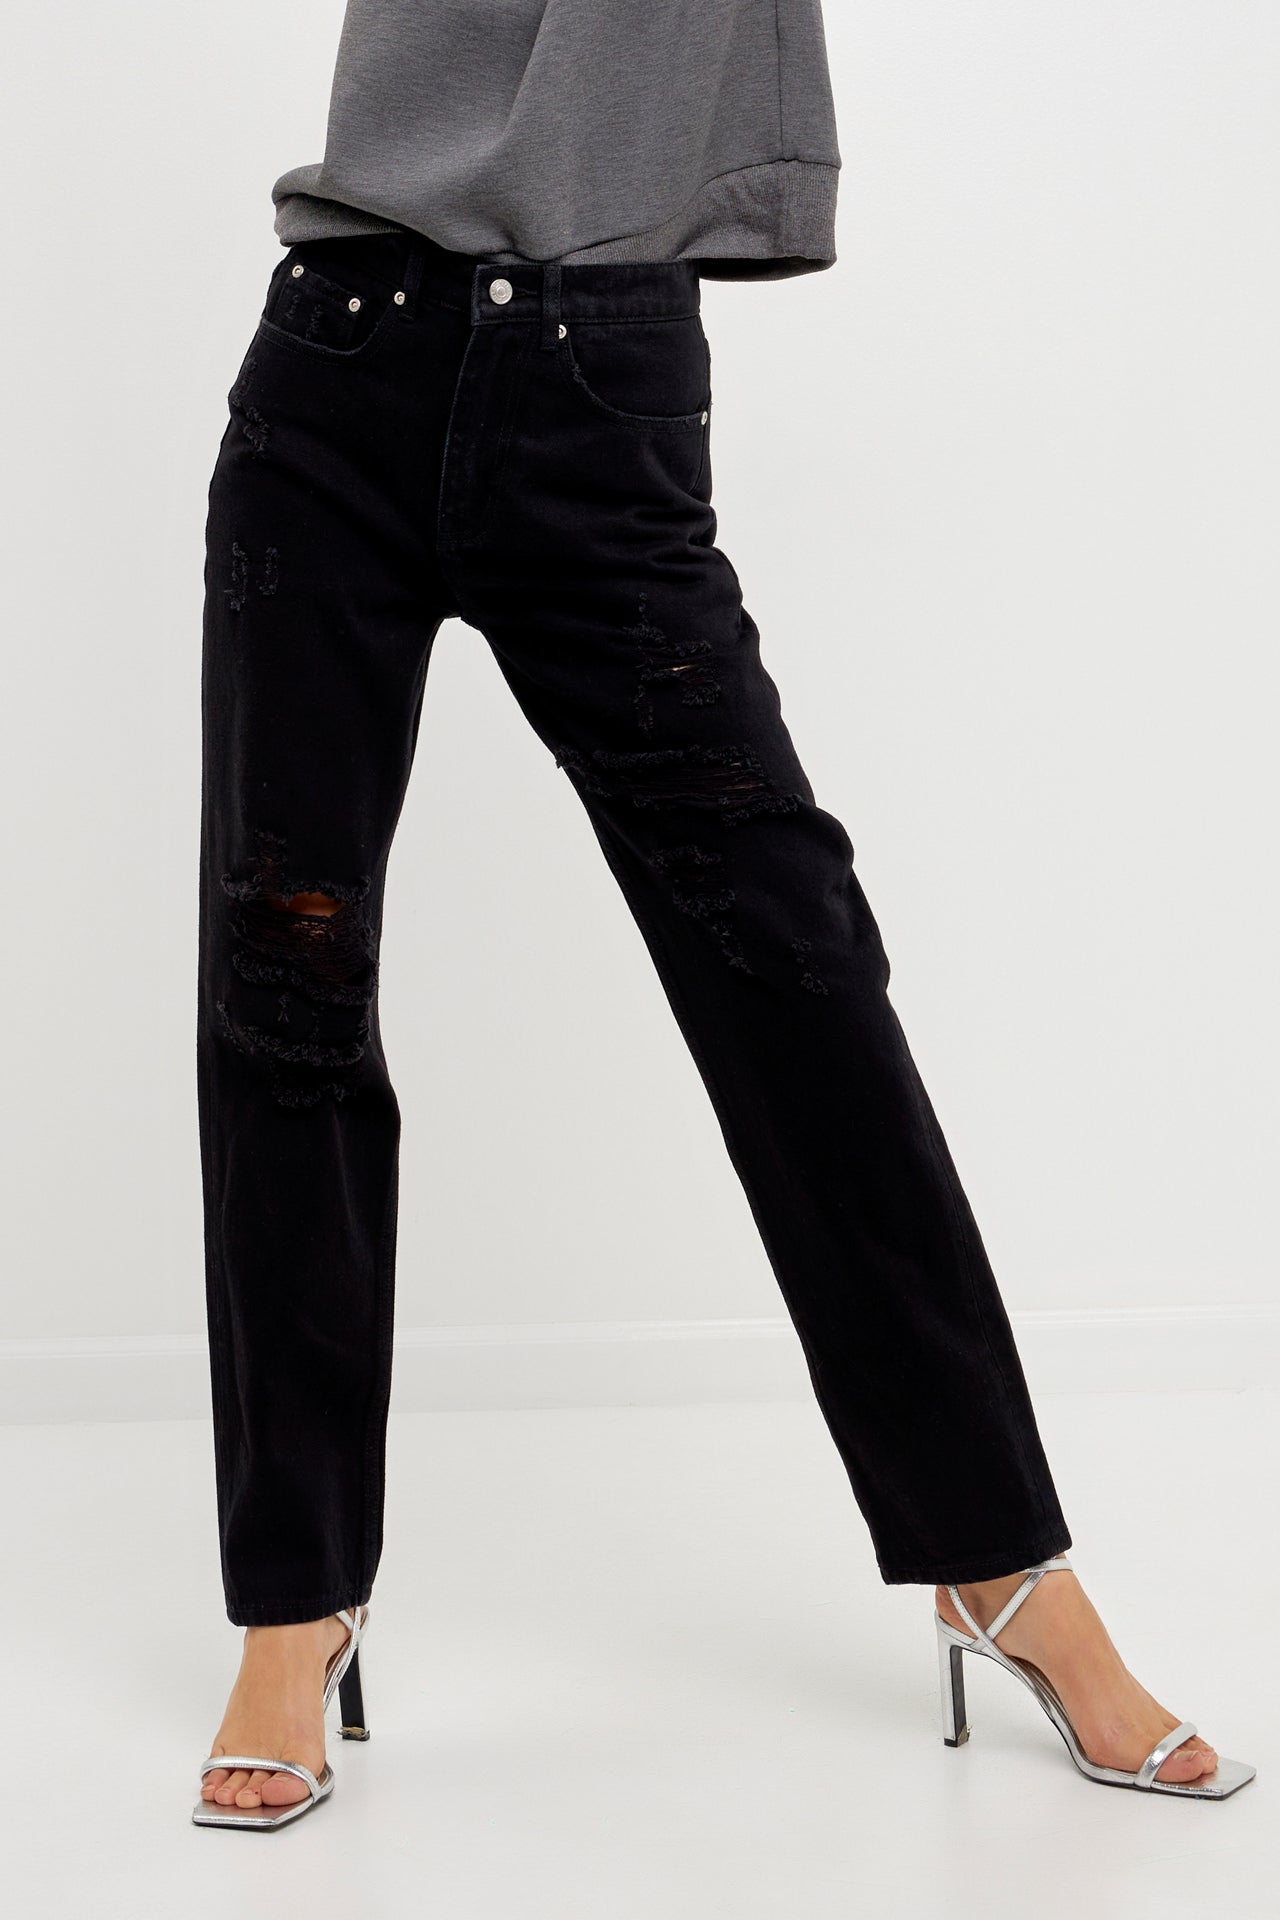 GREY LAB - Distressed Straight Leg Jeans - JEANS available at Objectrare